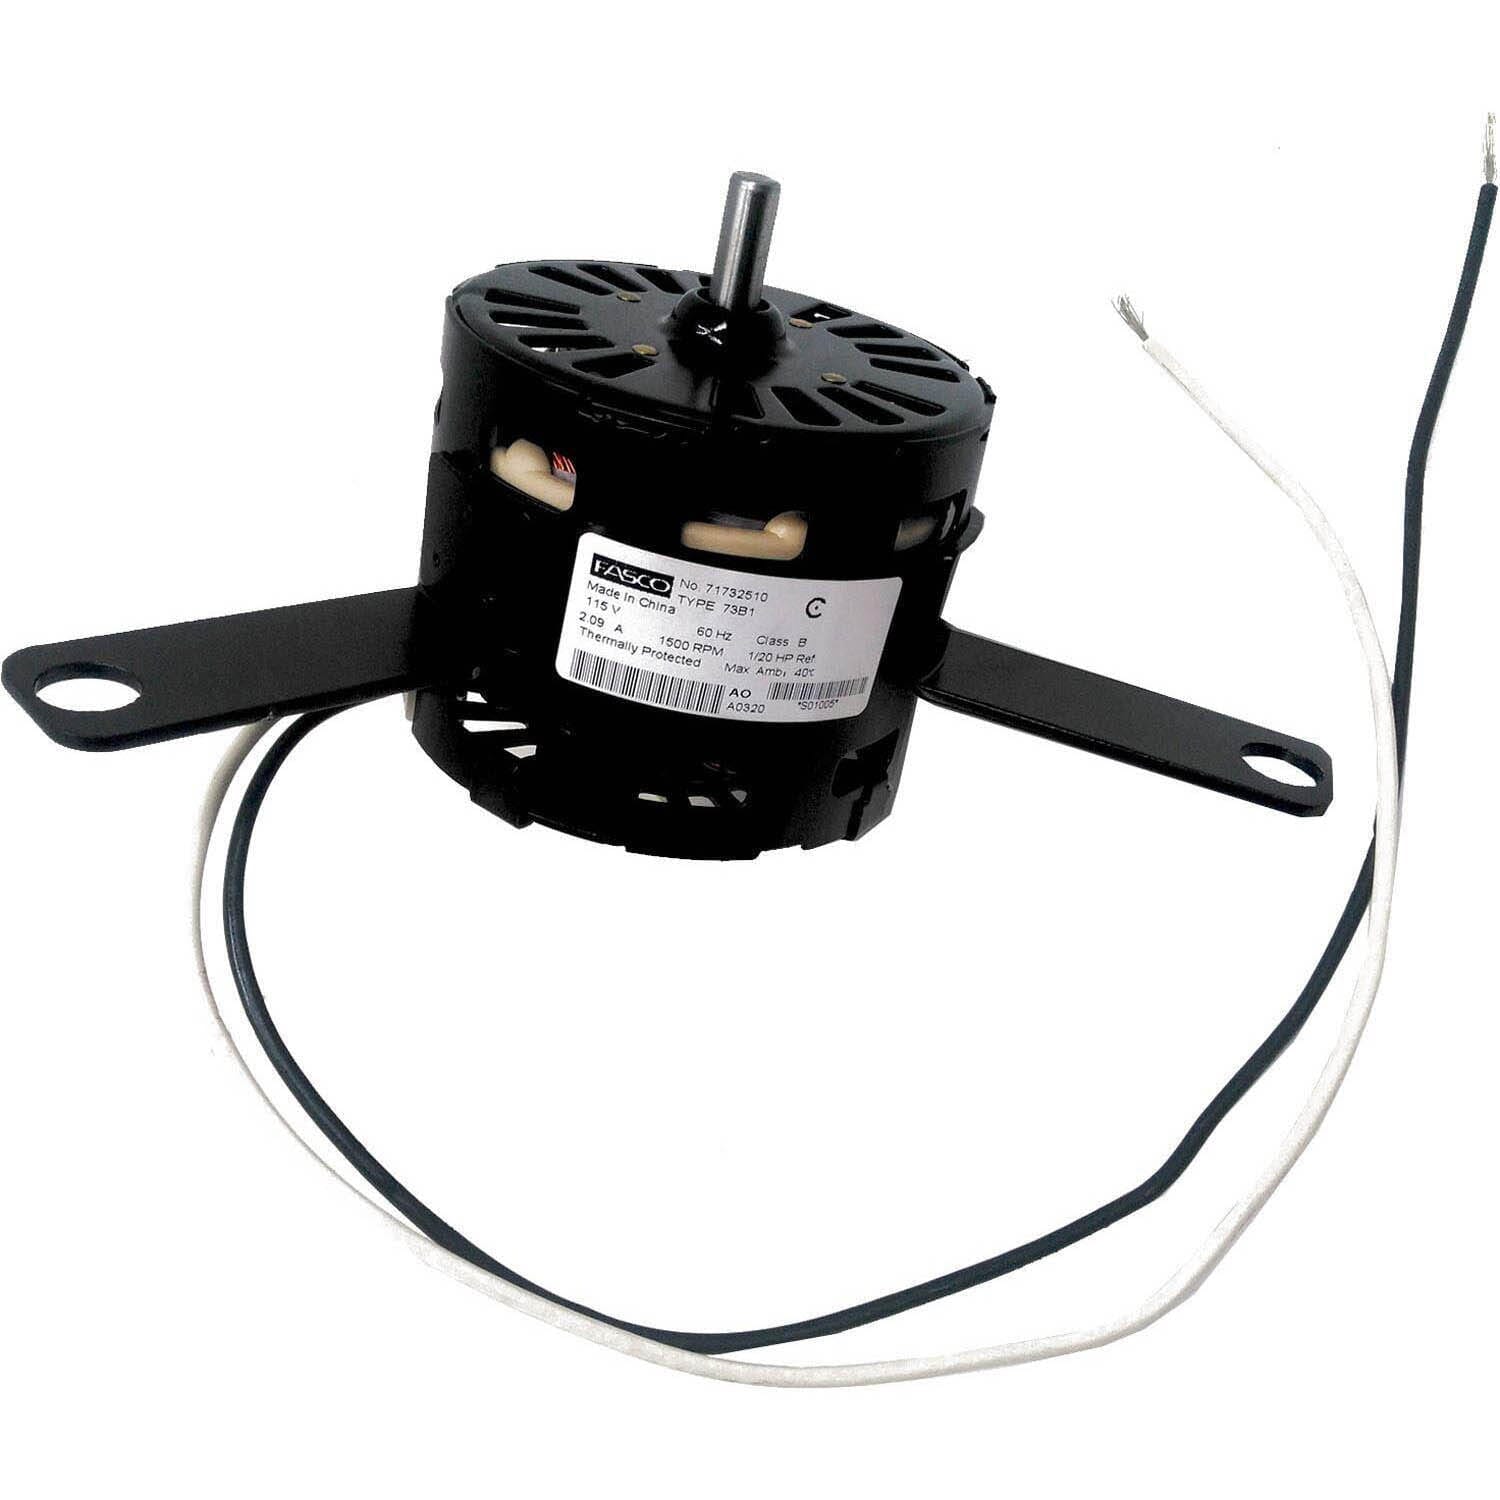 Harman Distribution Blower Motor Only, Accentra & Invincible Insert/ Super  Mag Stoker, 3-21-47120-MO